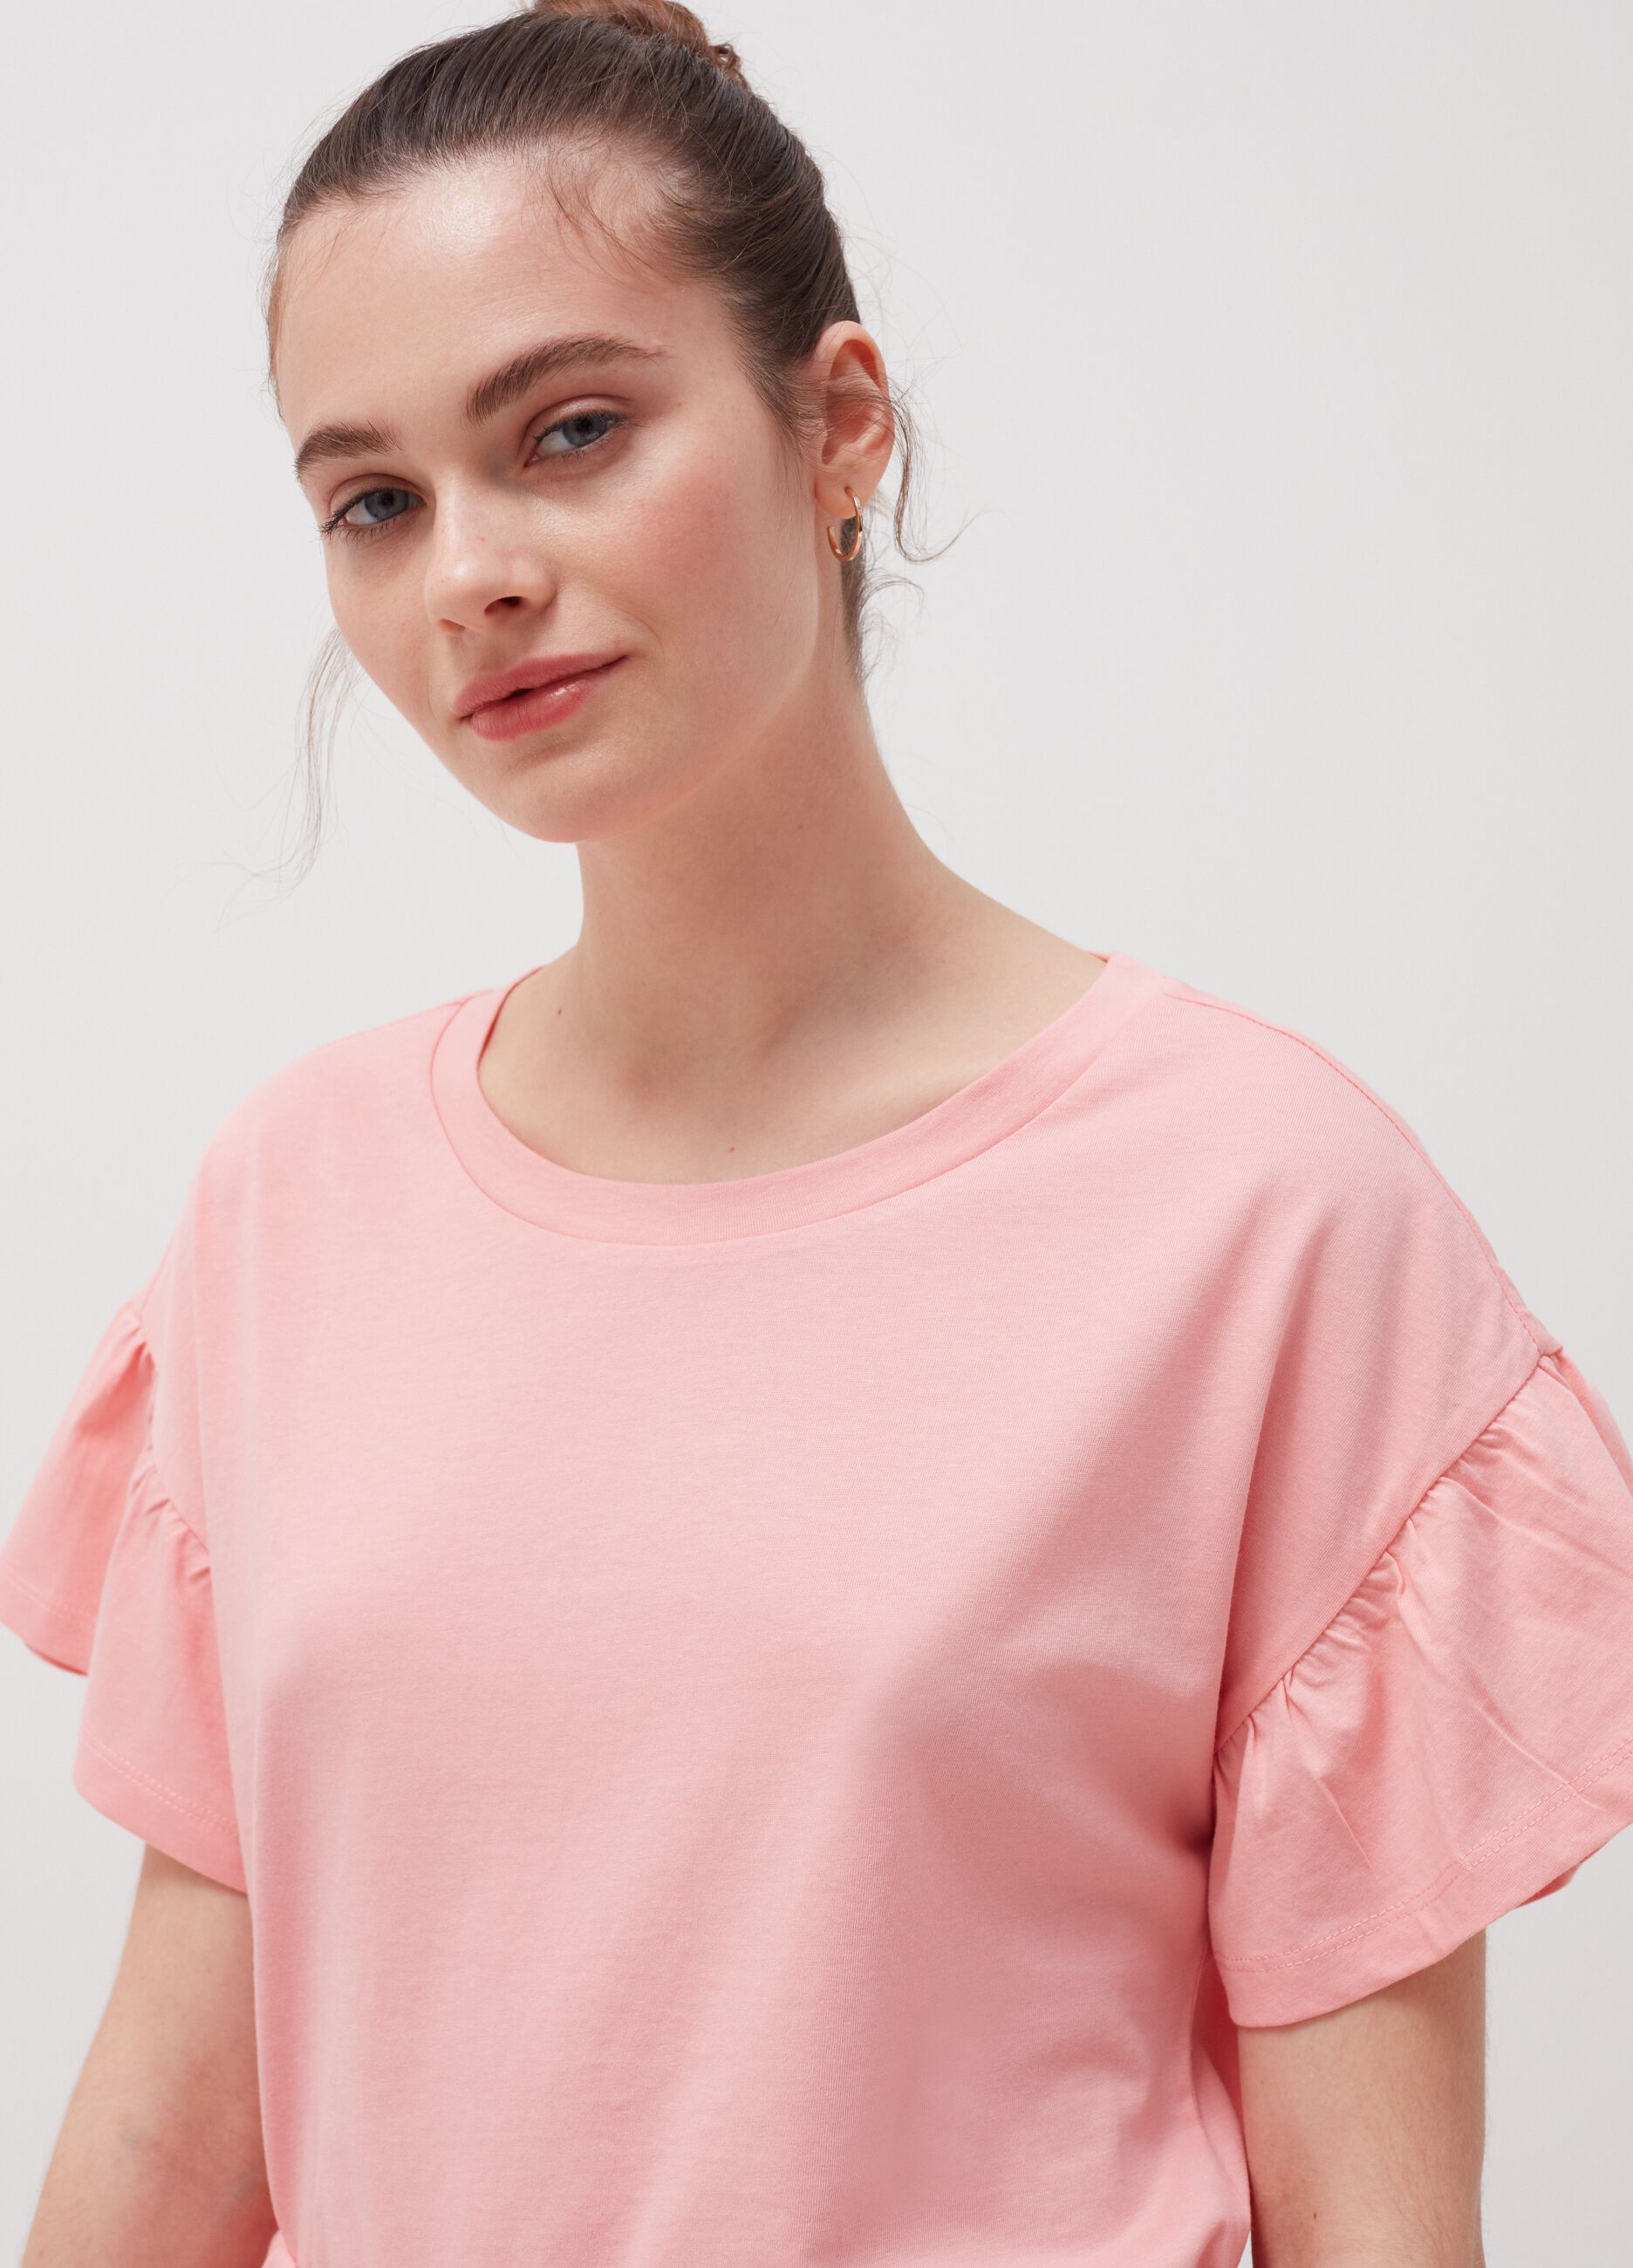 Pyjama top with butterfly sleeves